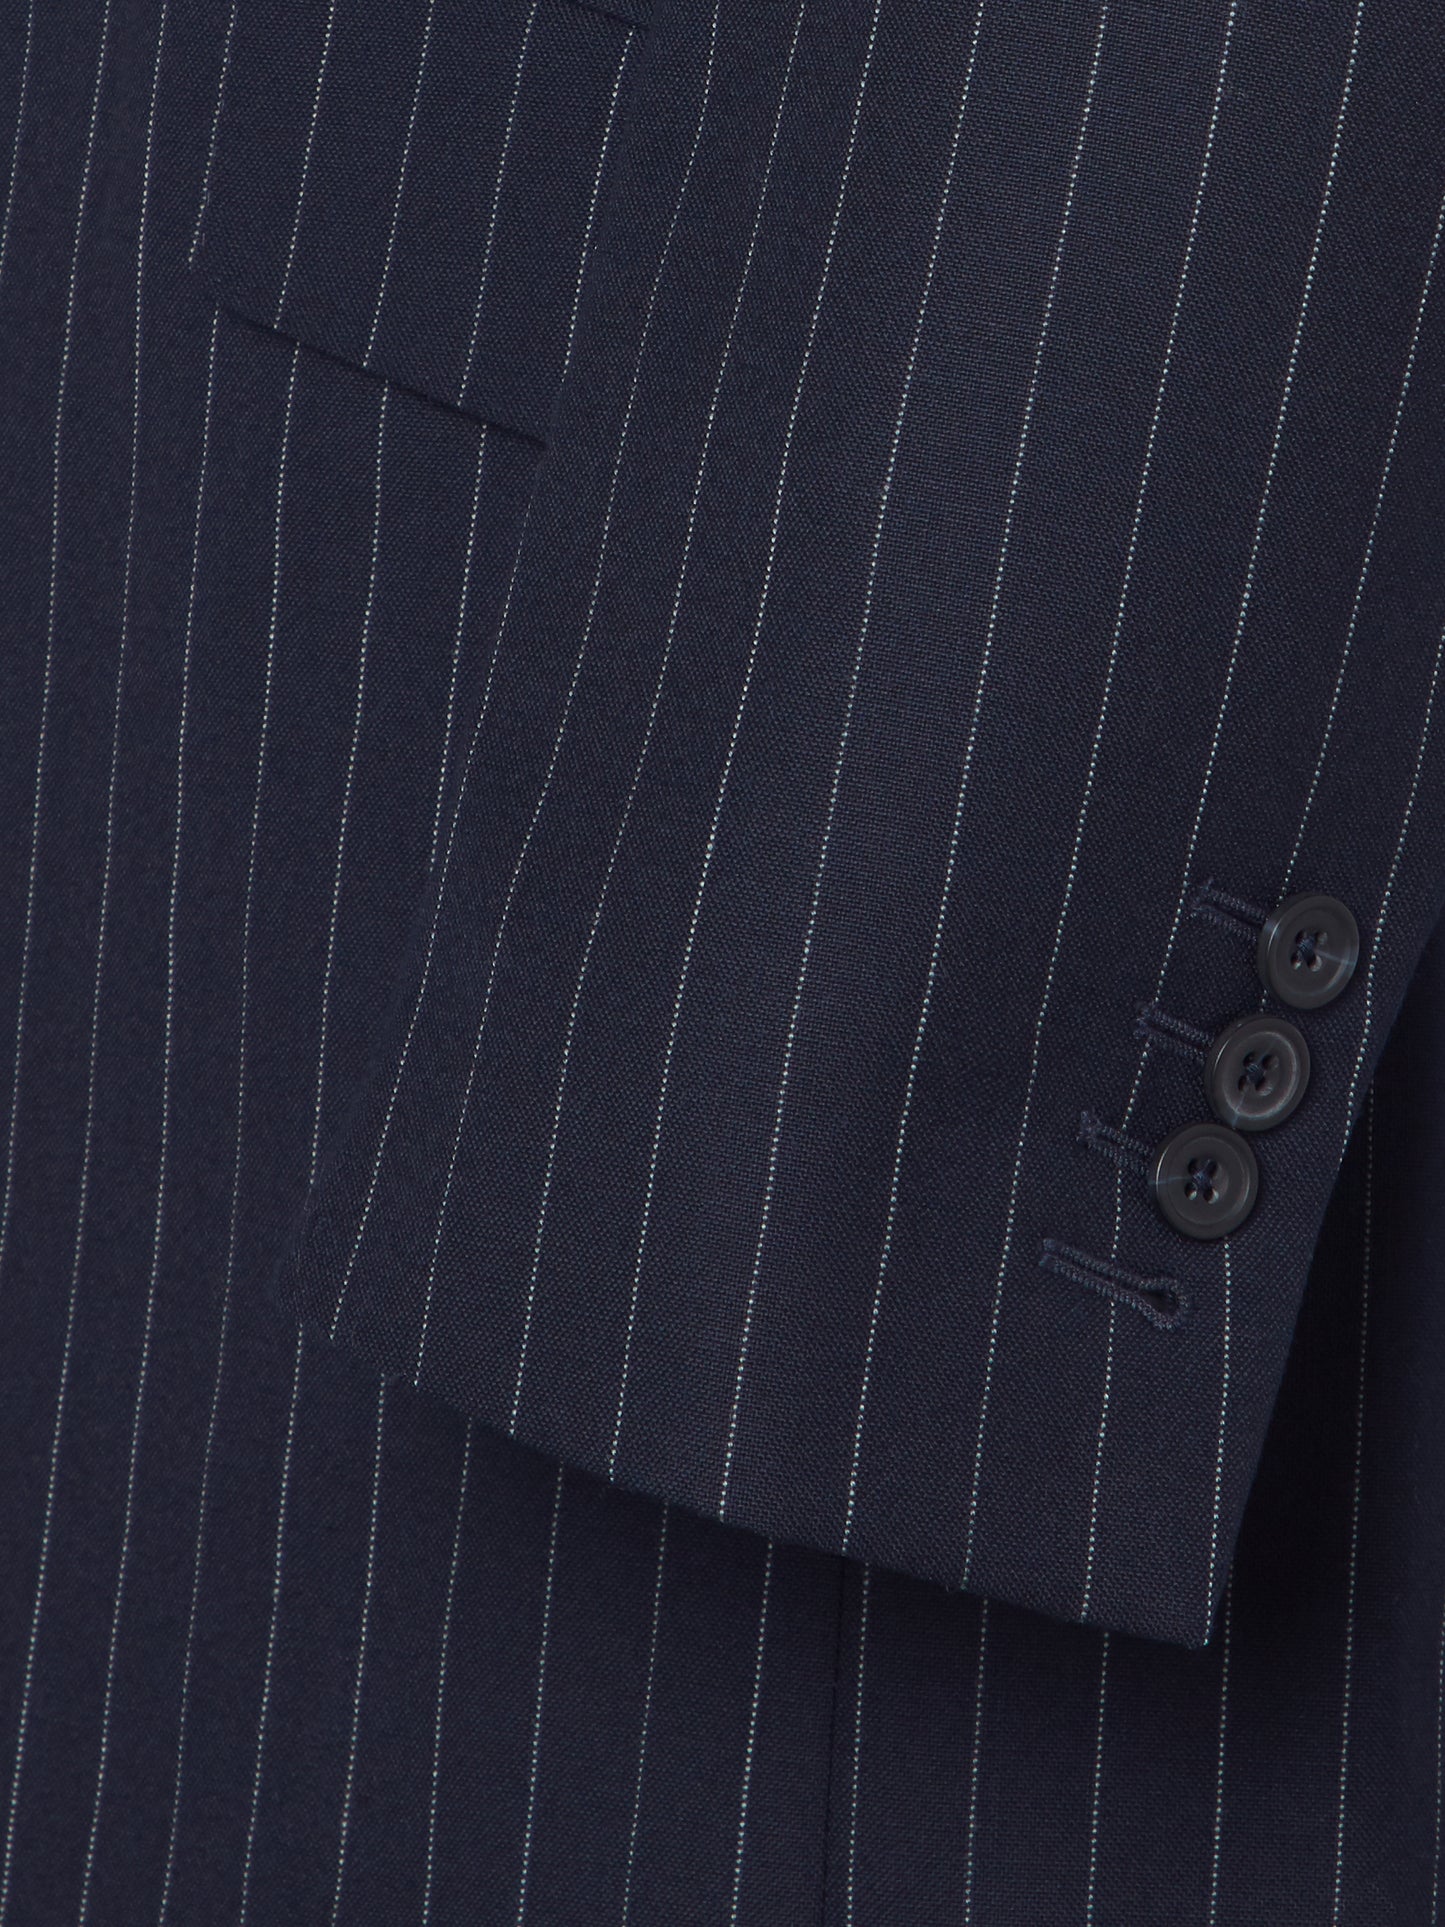 Limited Edition Eaton Suit - Lightweight Navy Pinstripe